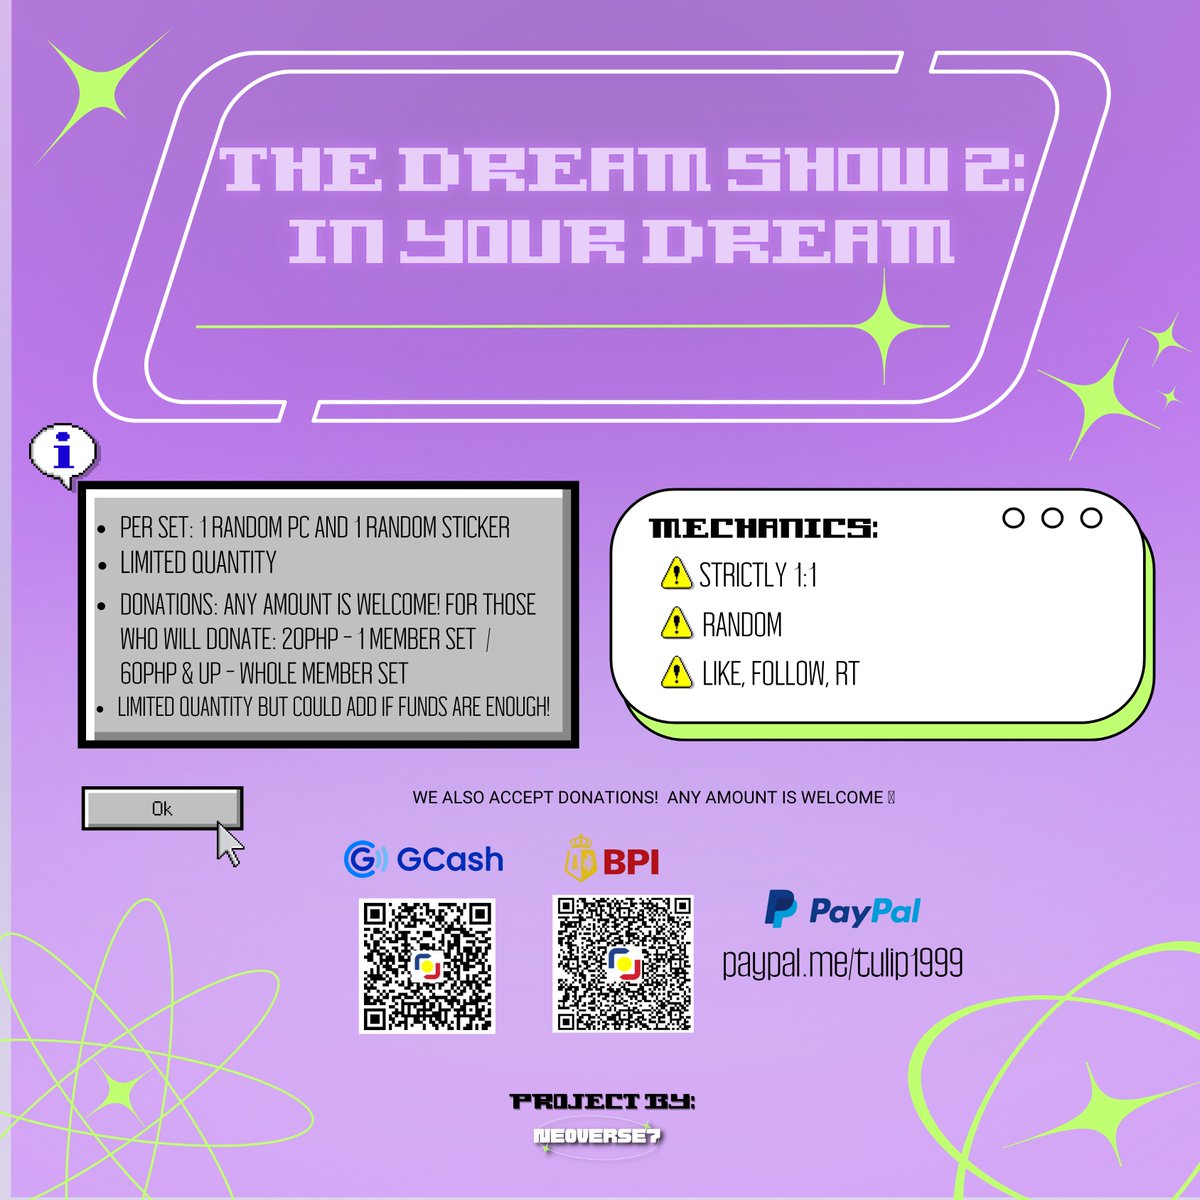 RT • LIKE #neoverse7 • NCT DREAM • PH  

To celebrate the upcoming encore con!

THE DREAM SHOW 2: In Your Dream 
!fan support + giveaway • photocard & sticker set!  

— free! must follow mech + pay lsf 
— strictly 1:1 
— we accept donations too 💚 send us a message :)